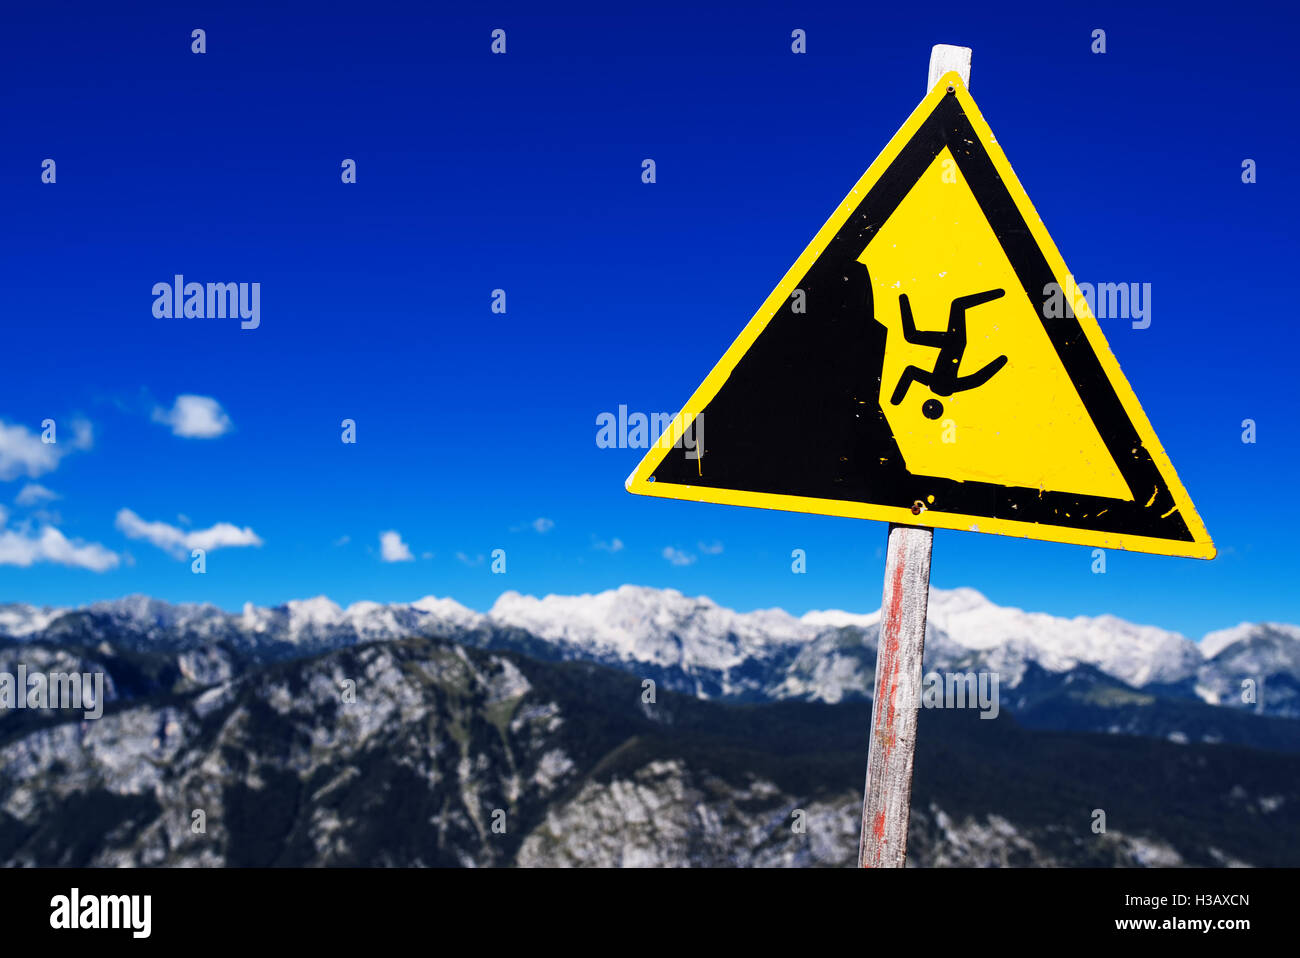 Warning sign - possible fall from the mountain cliff, Julian Alps in the background Stock Photo